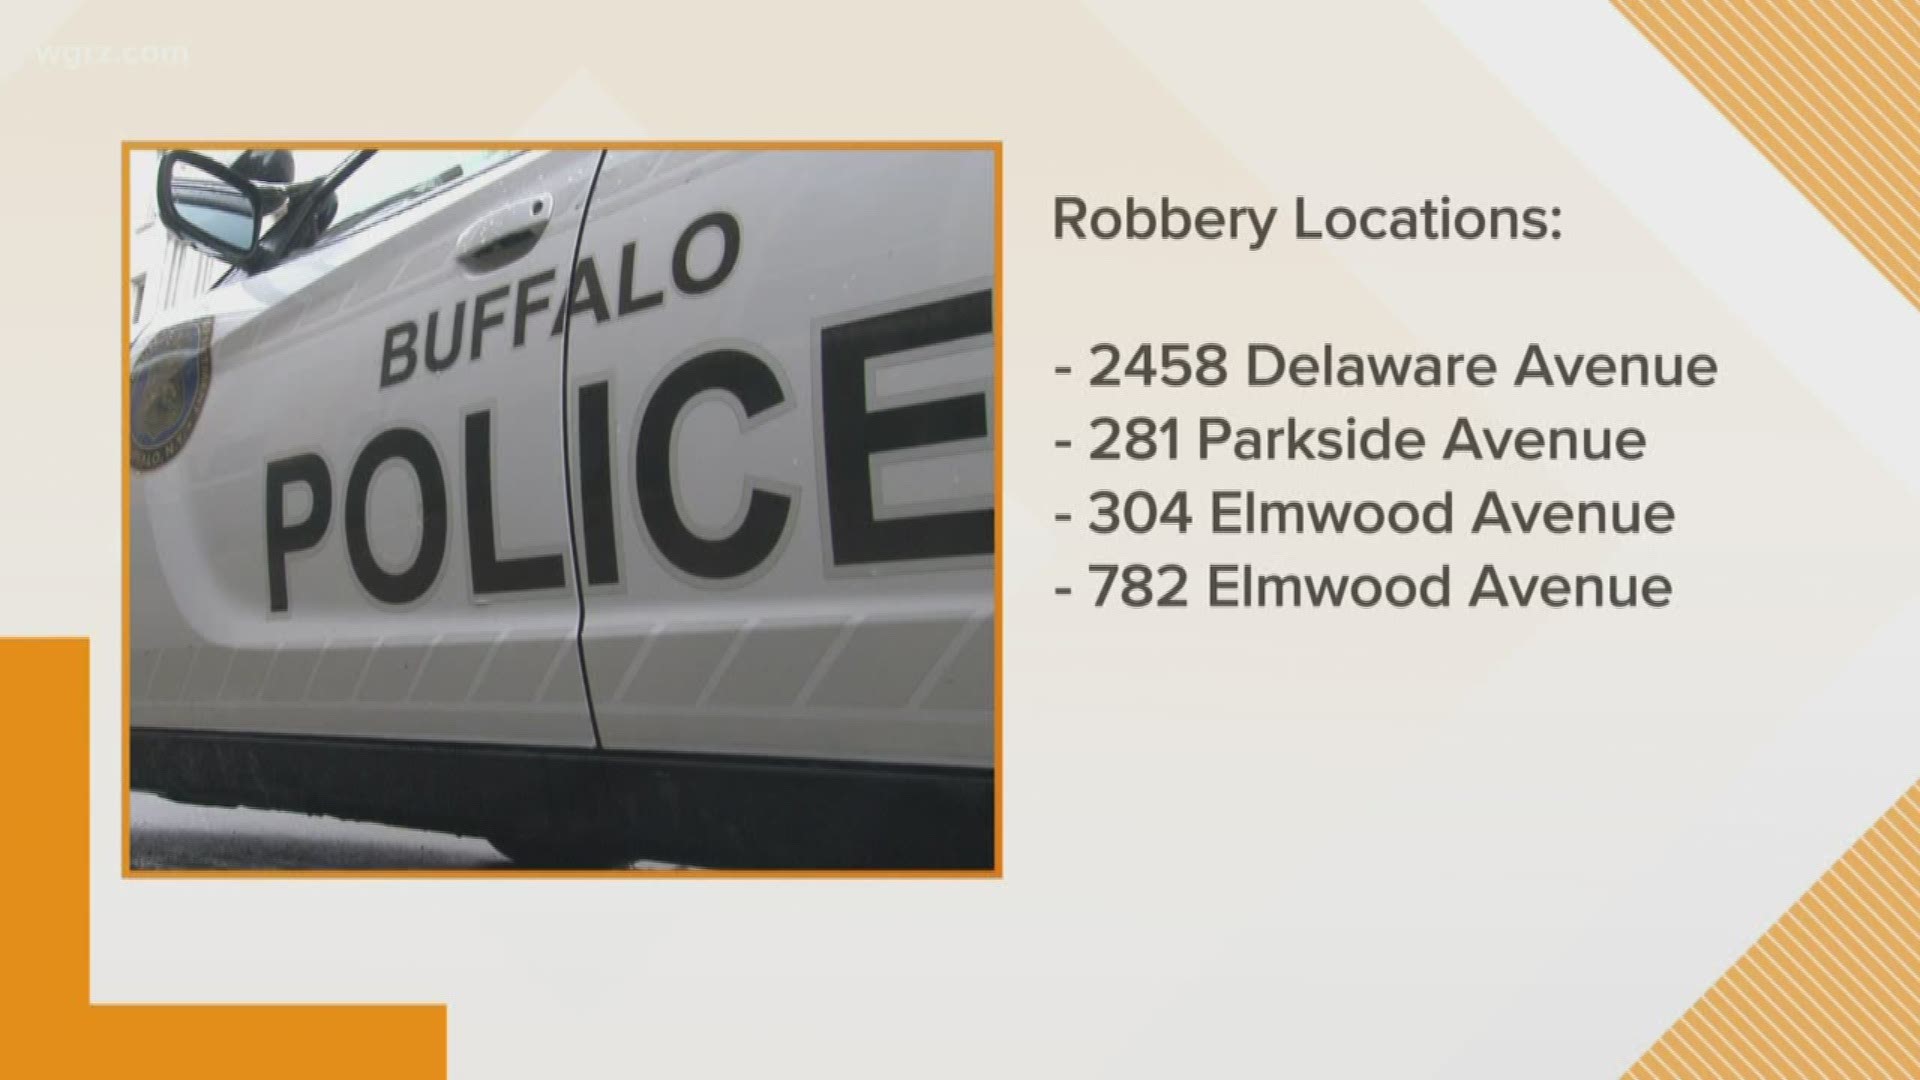 Officers say four different 7-eleven stores were robbed early Monday morning.